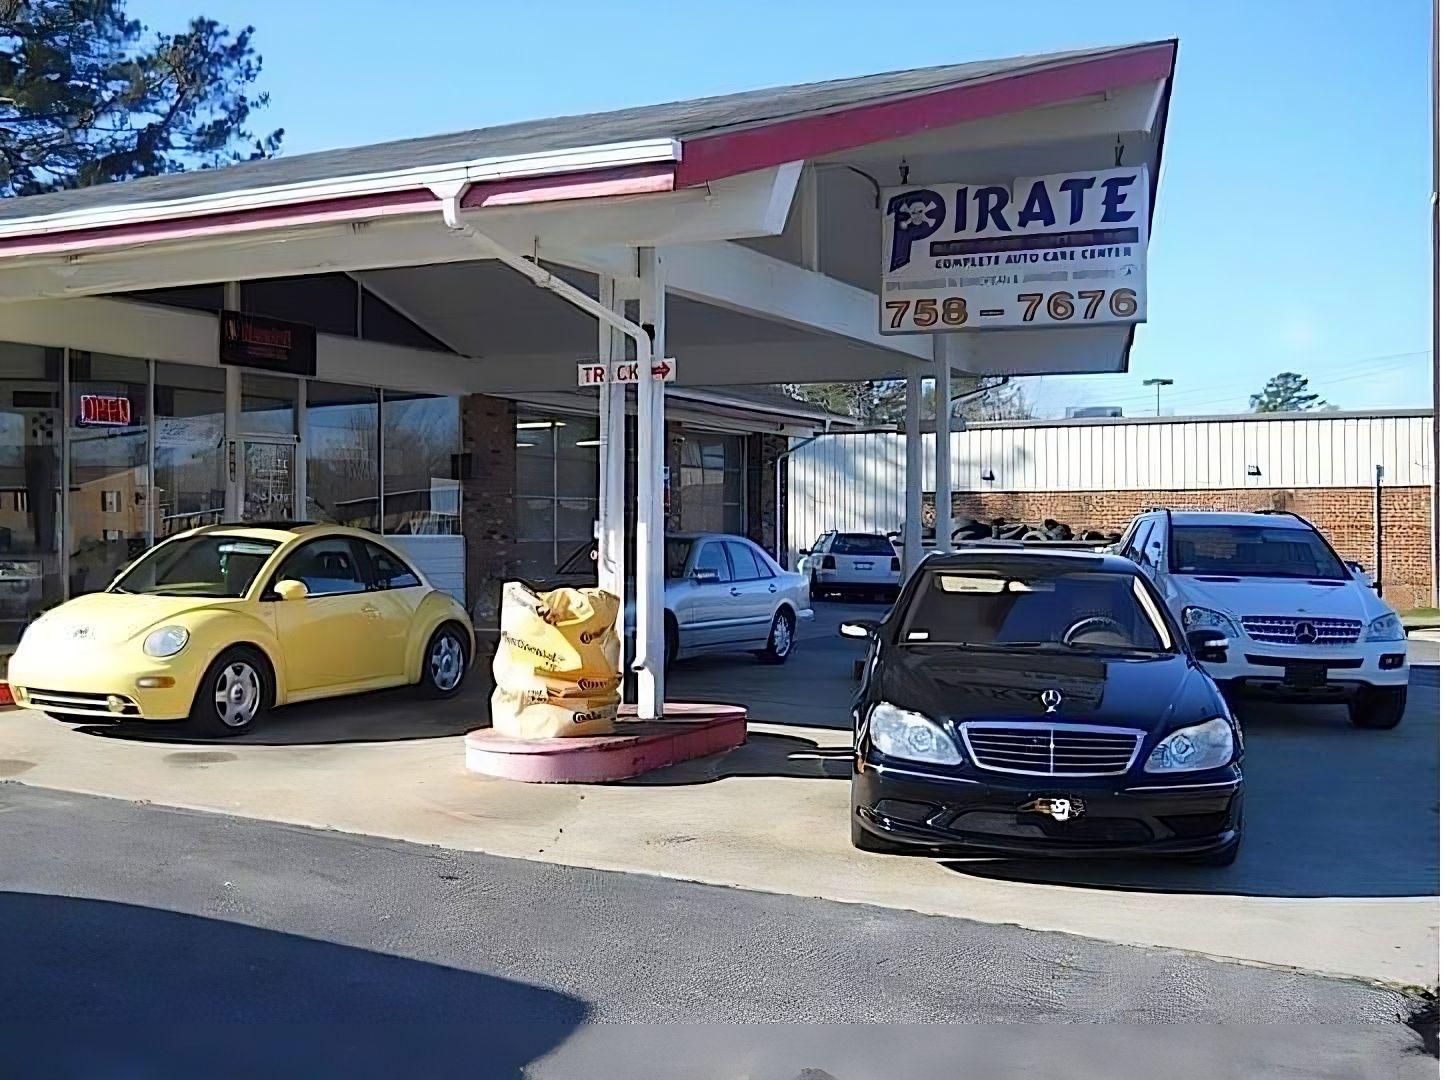 Several cars are parked in front of a pirate car dealership